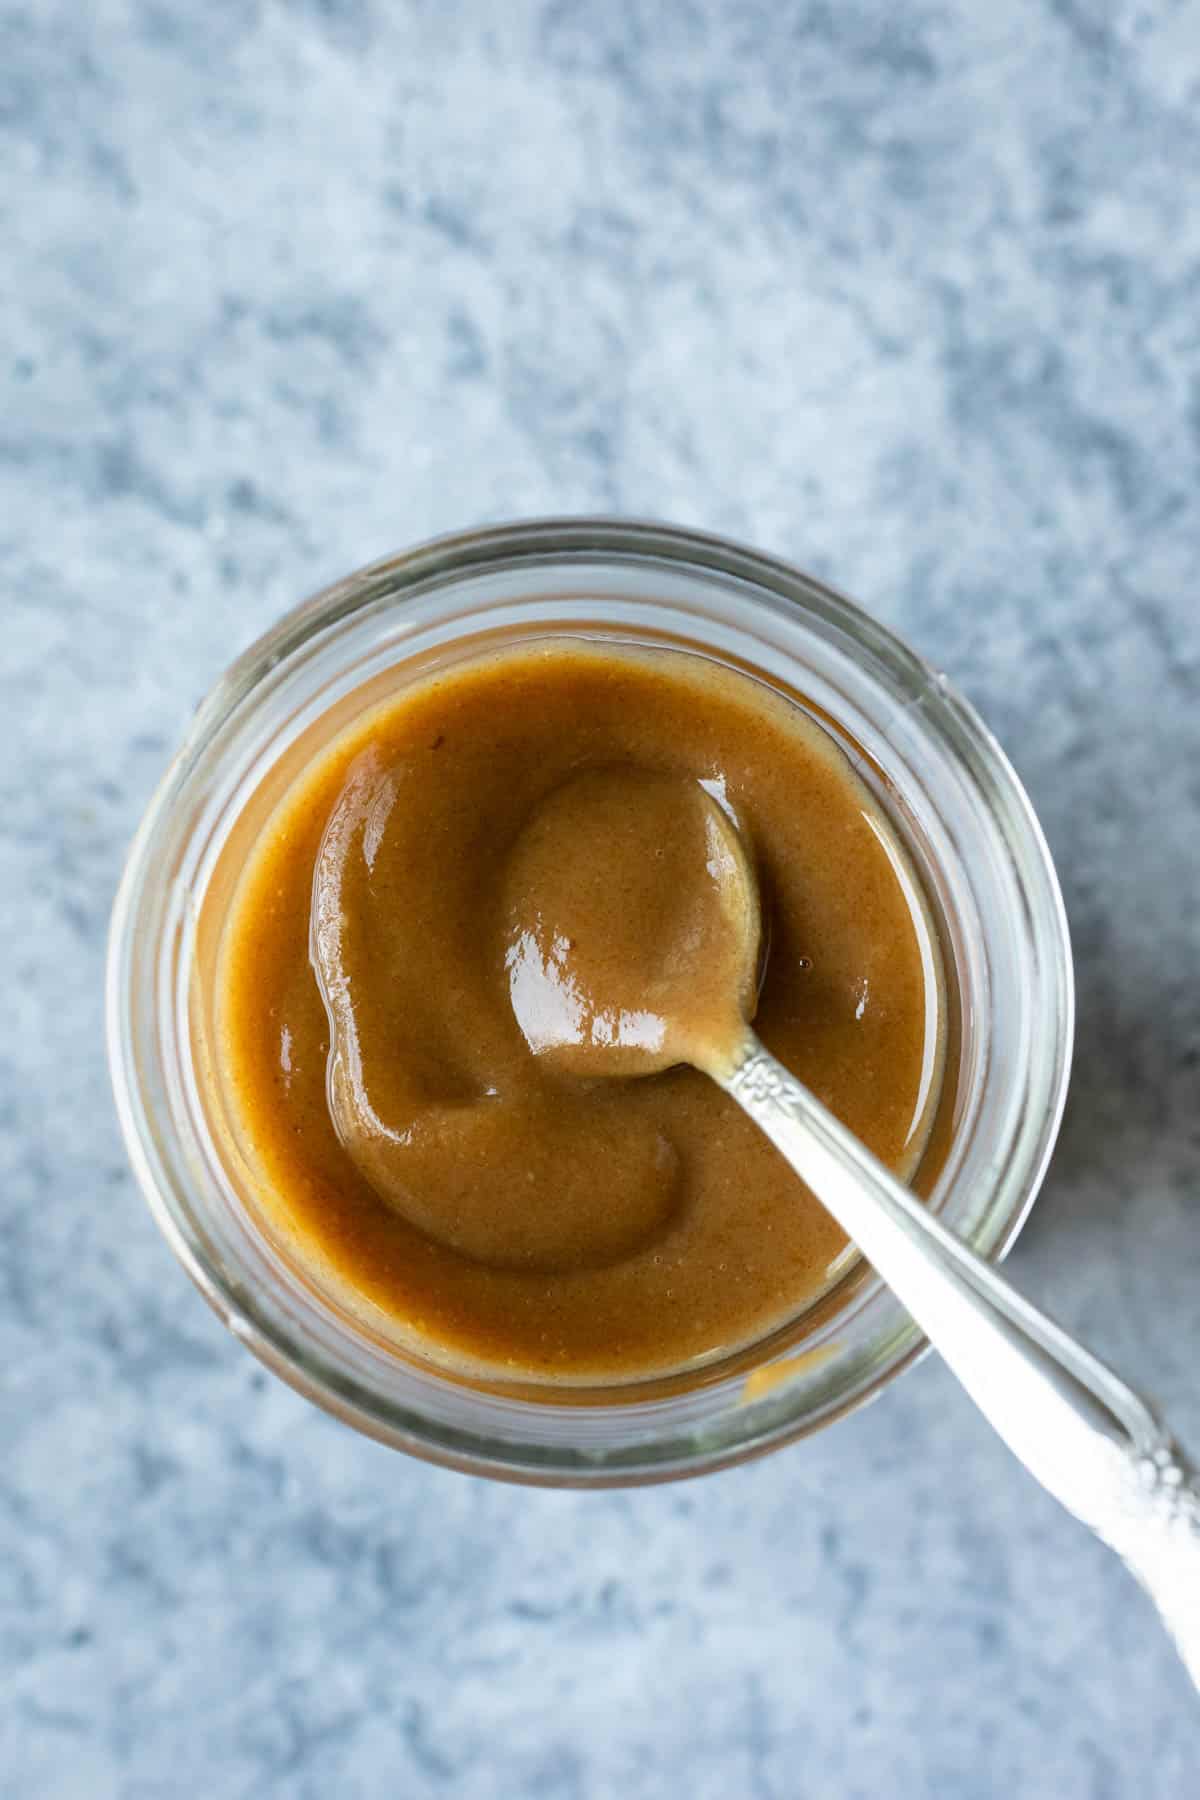 A small spoon scooping date caramel sauce from a jar.